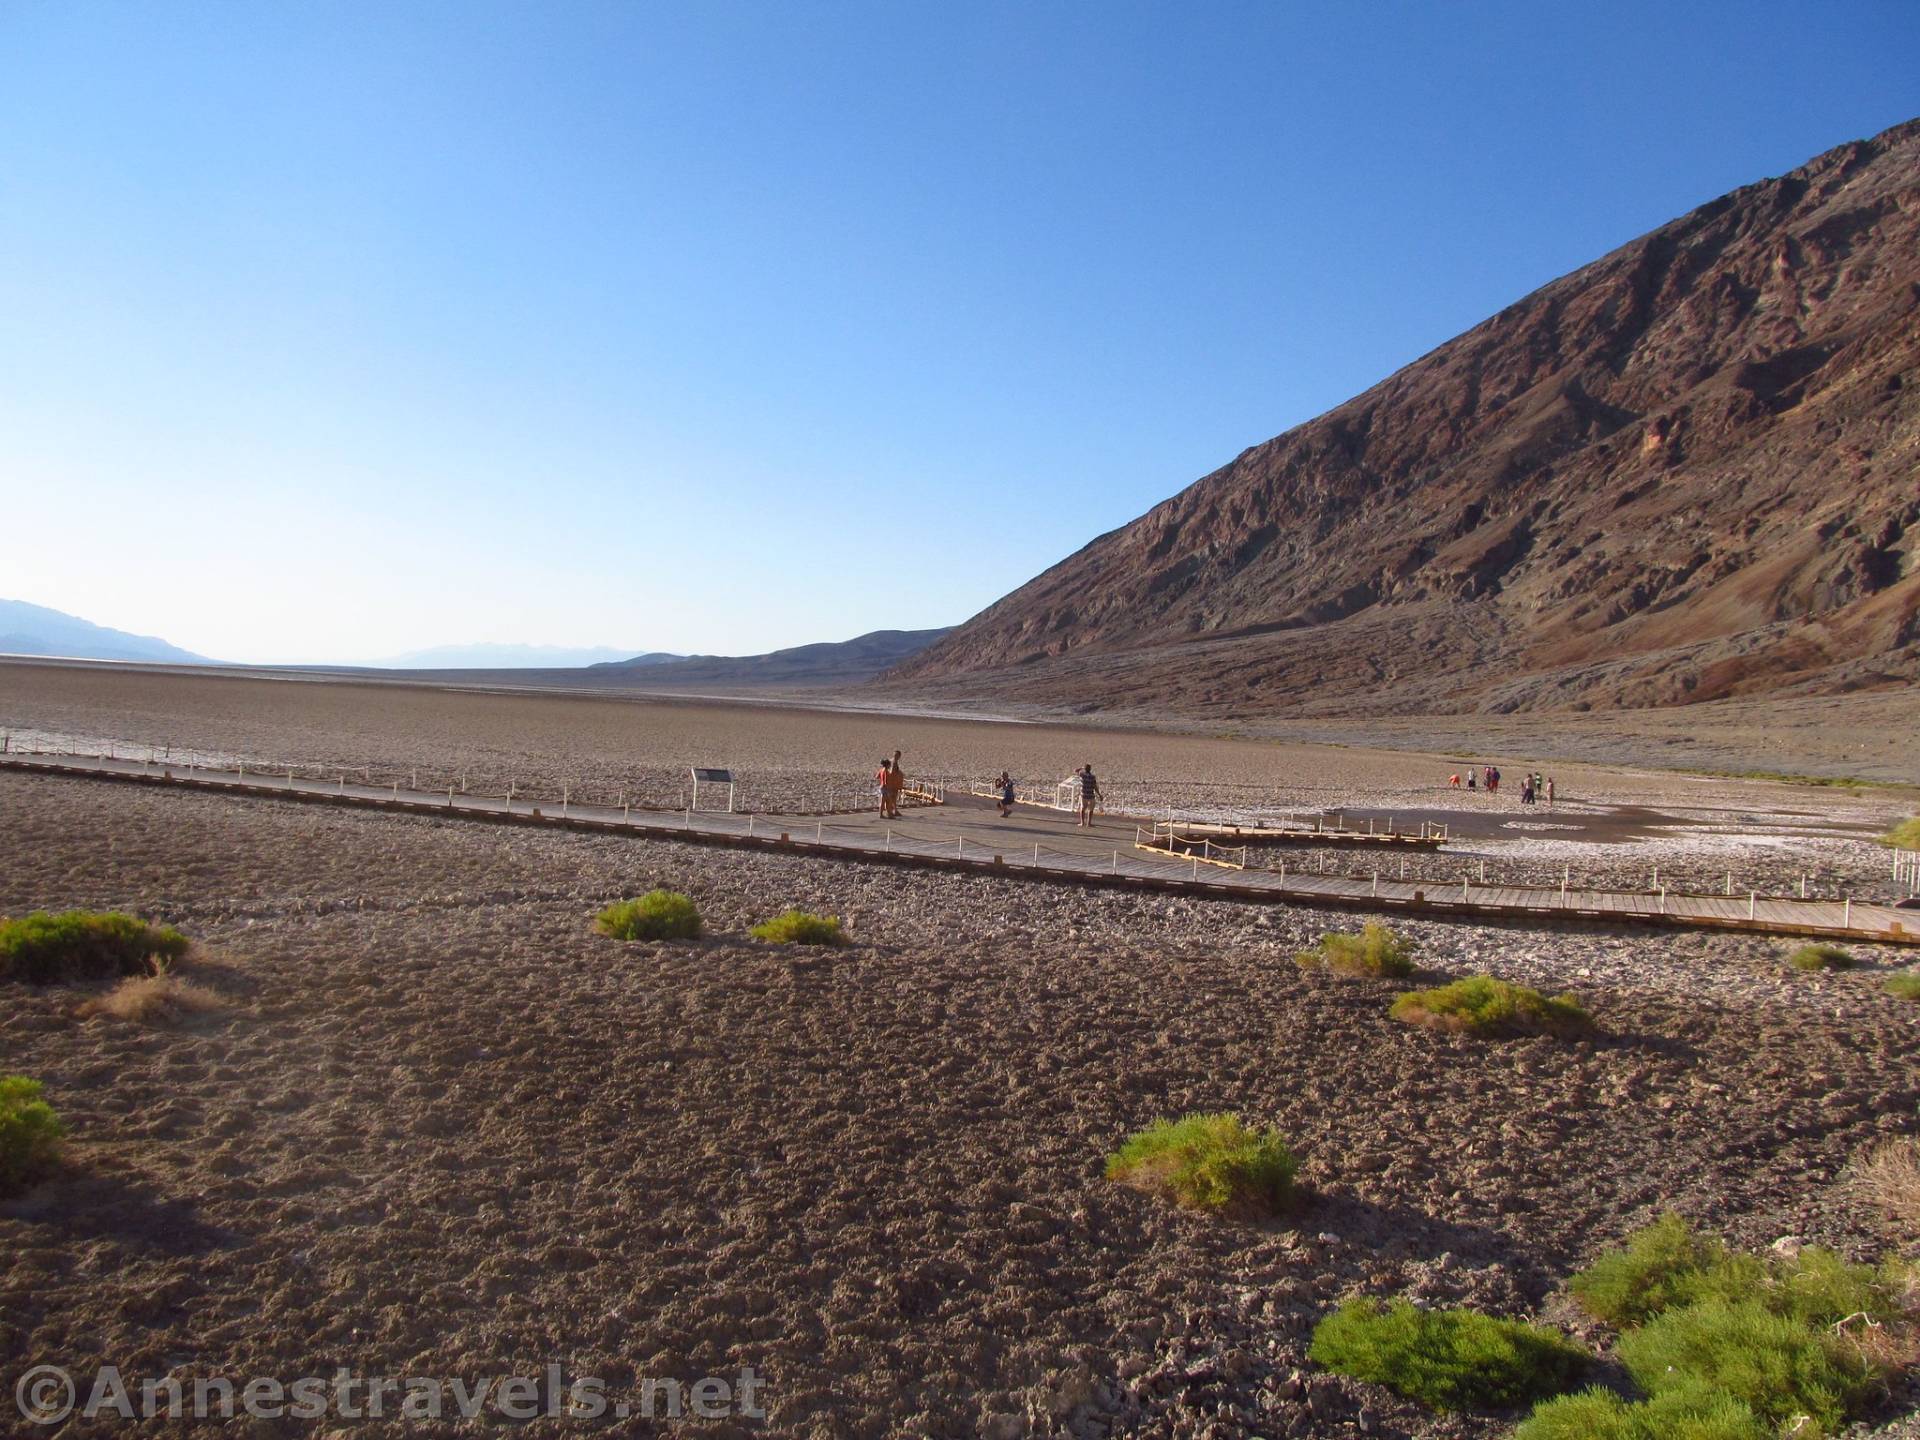 Evening at Badwater Basin, Death Valley National Park, California